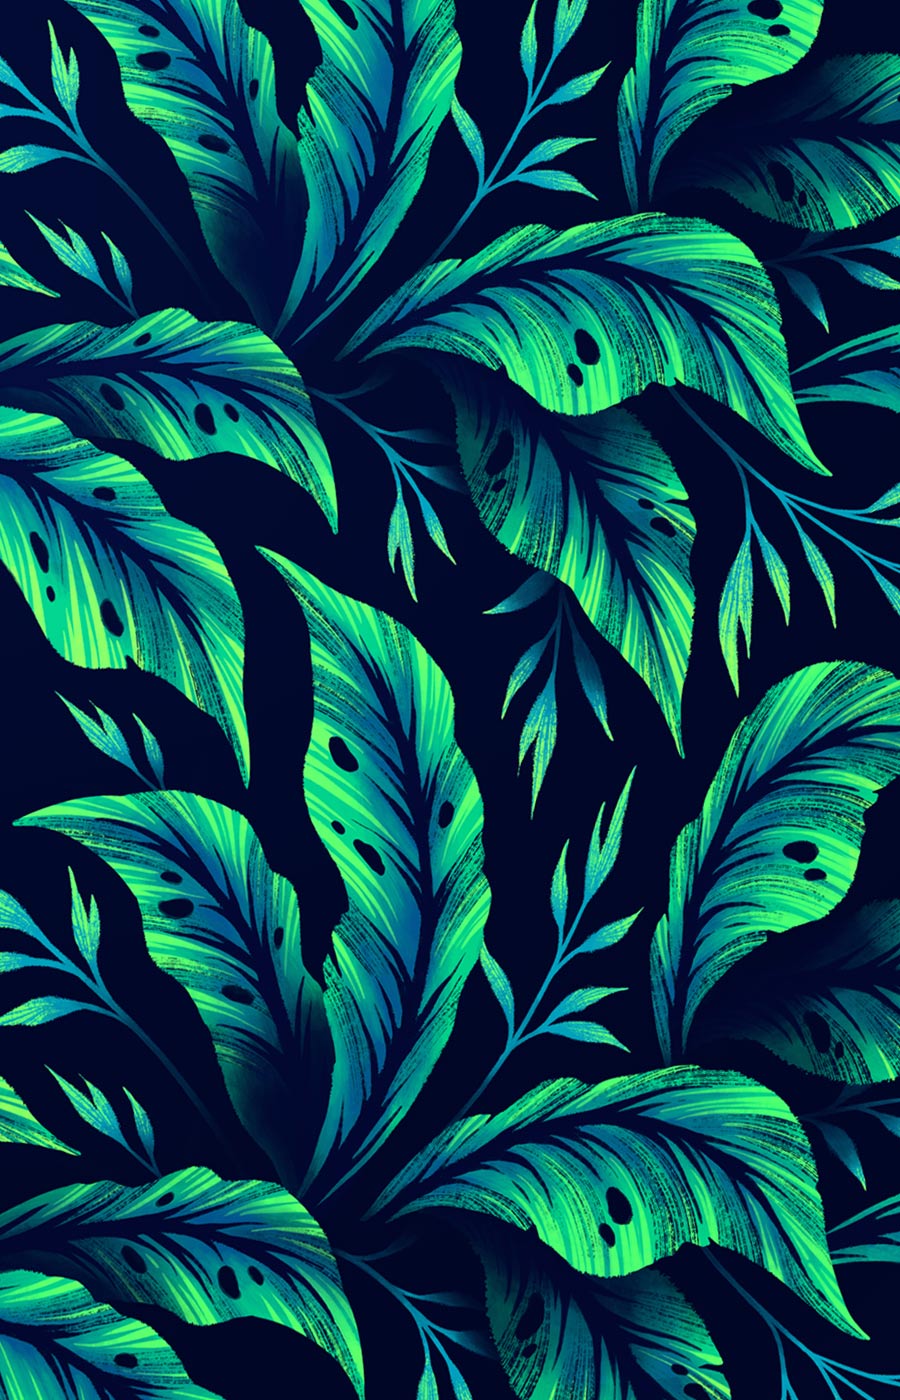 Green leaves foliage patten by Andrea Muller